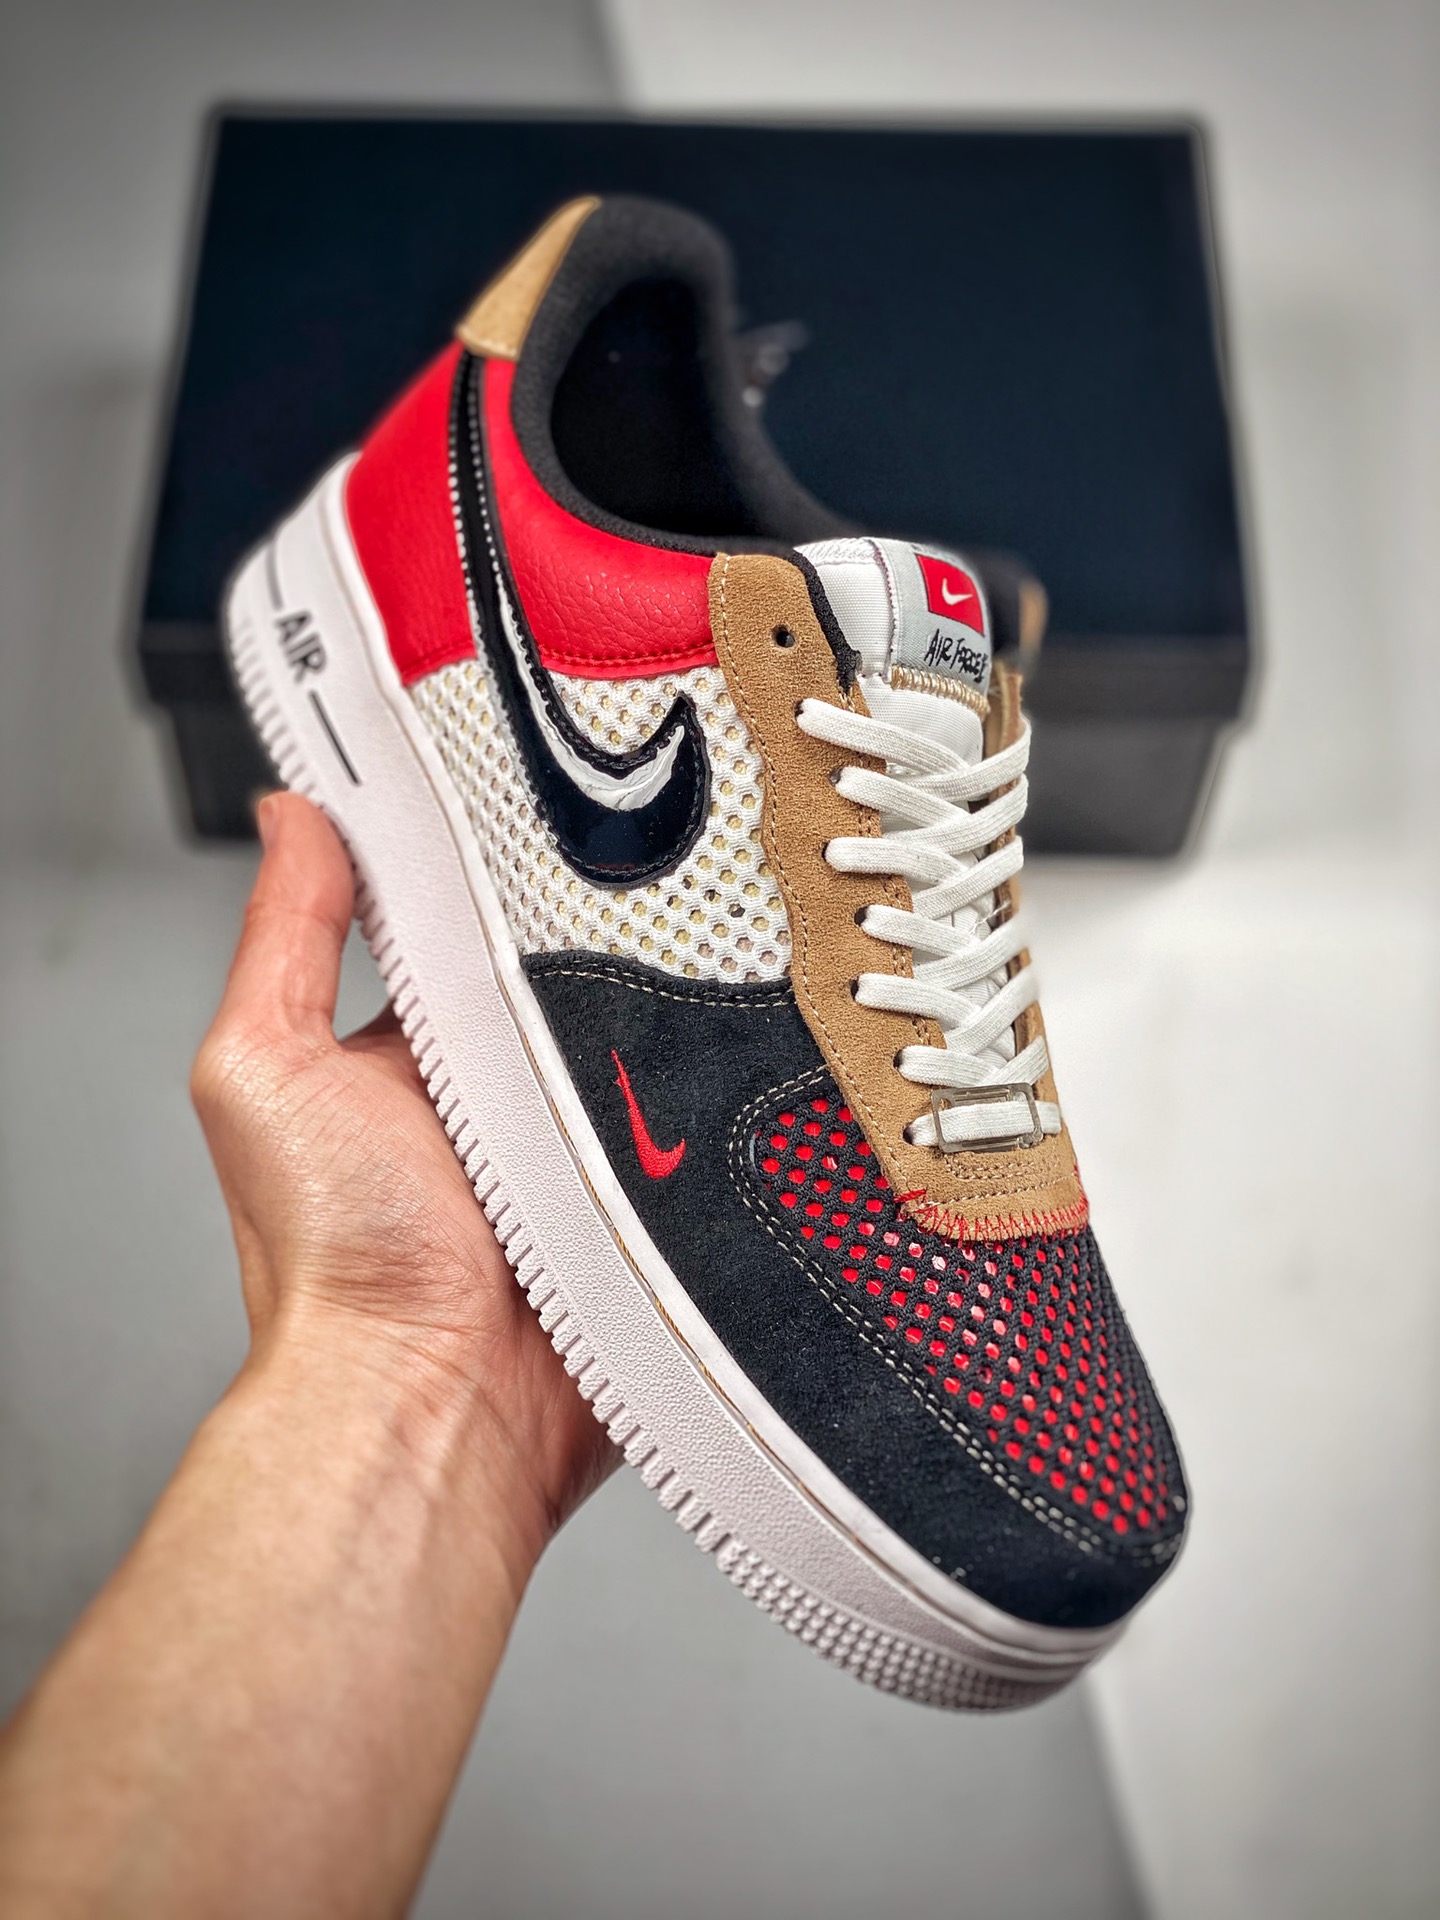 Nike Air AF Force 1 Low Alter &amp; Reveal Black/White-Red-Tan Shoes